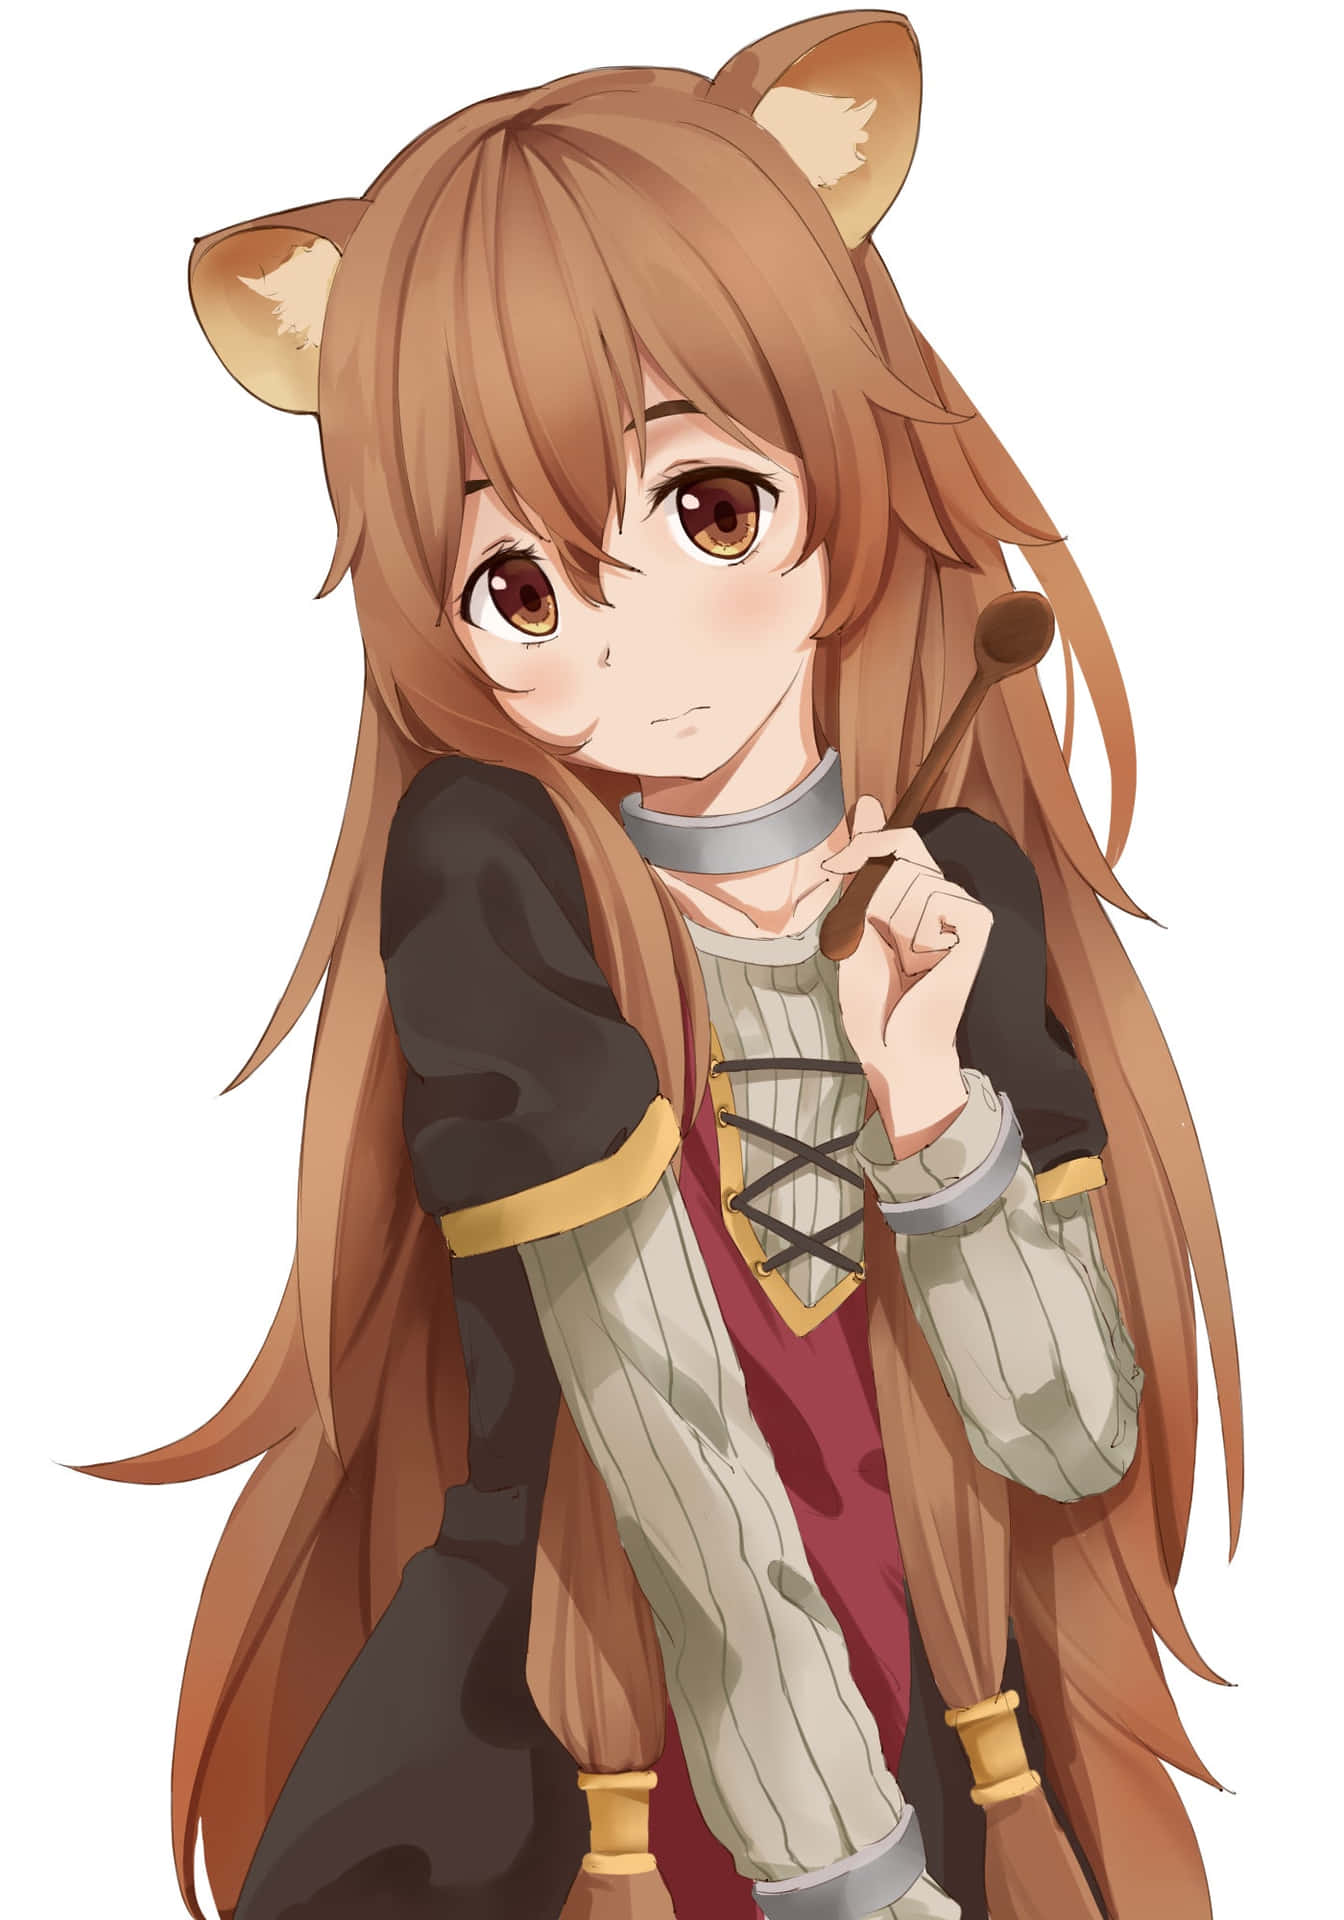 "Protecting justice and freedom, Raphtalia stands ready to fight!"